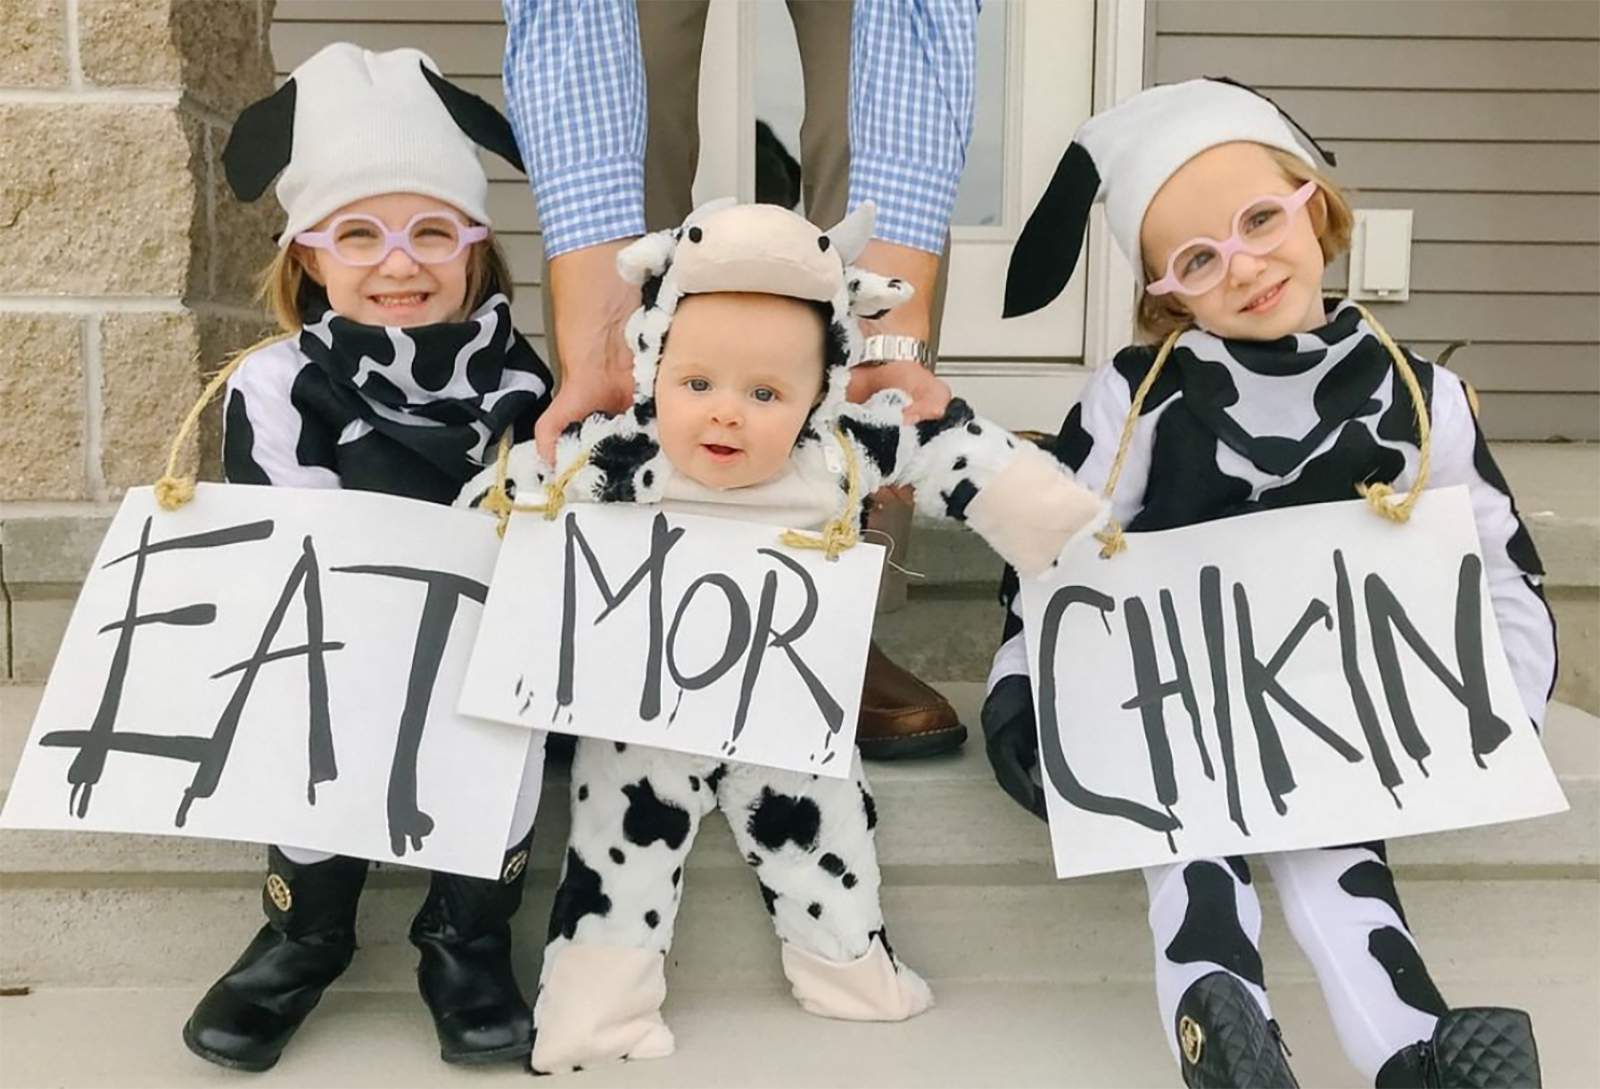 Chick-fil-A cancels Cow Appreciation Day. But feel free to wear your cow costume at home